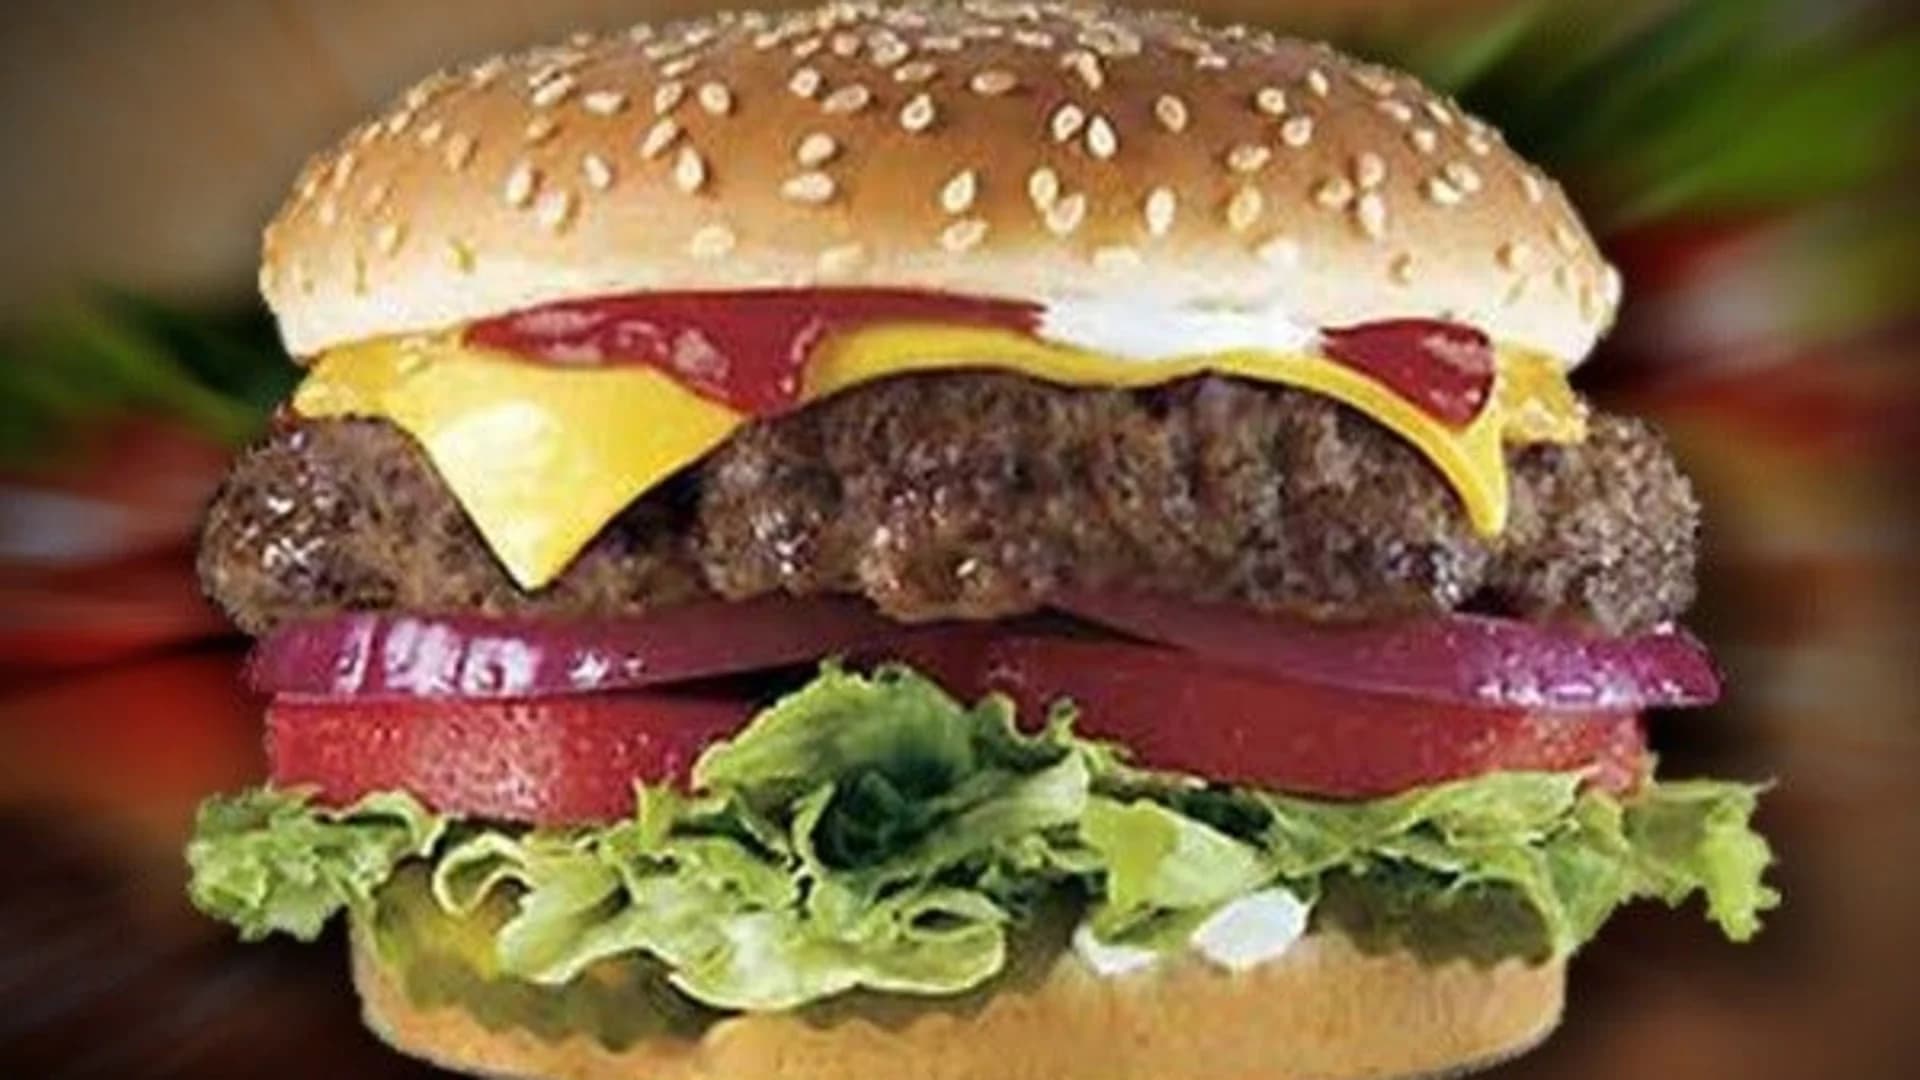 National Hamburger Day – Where is your favorite place to get a burger?